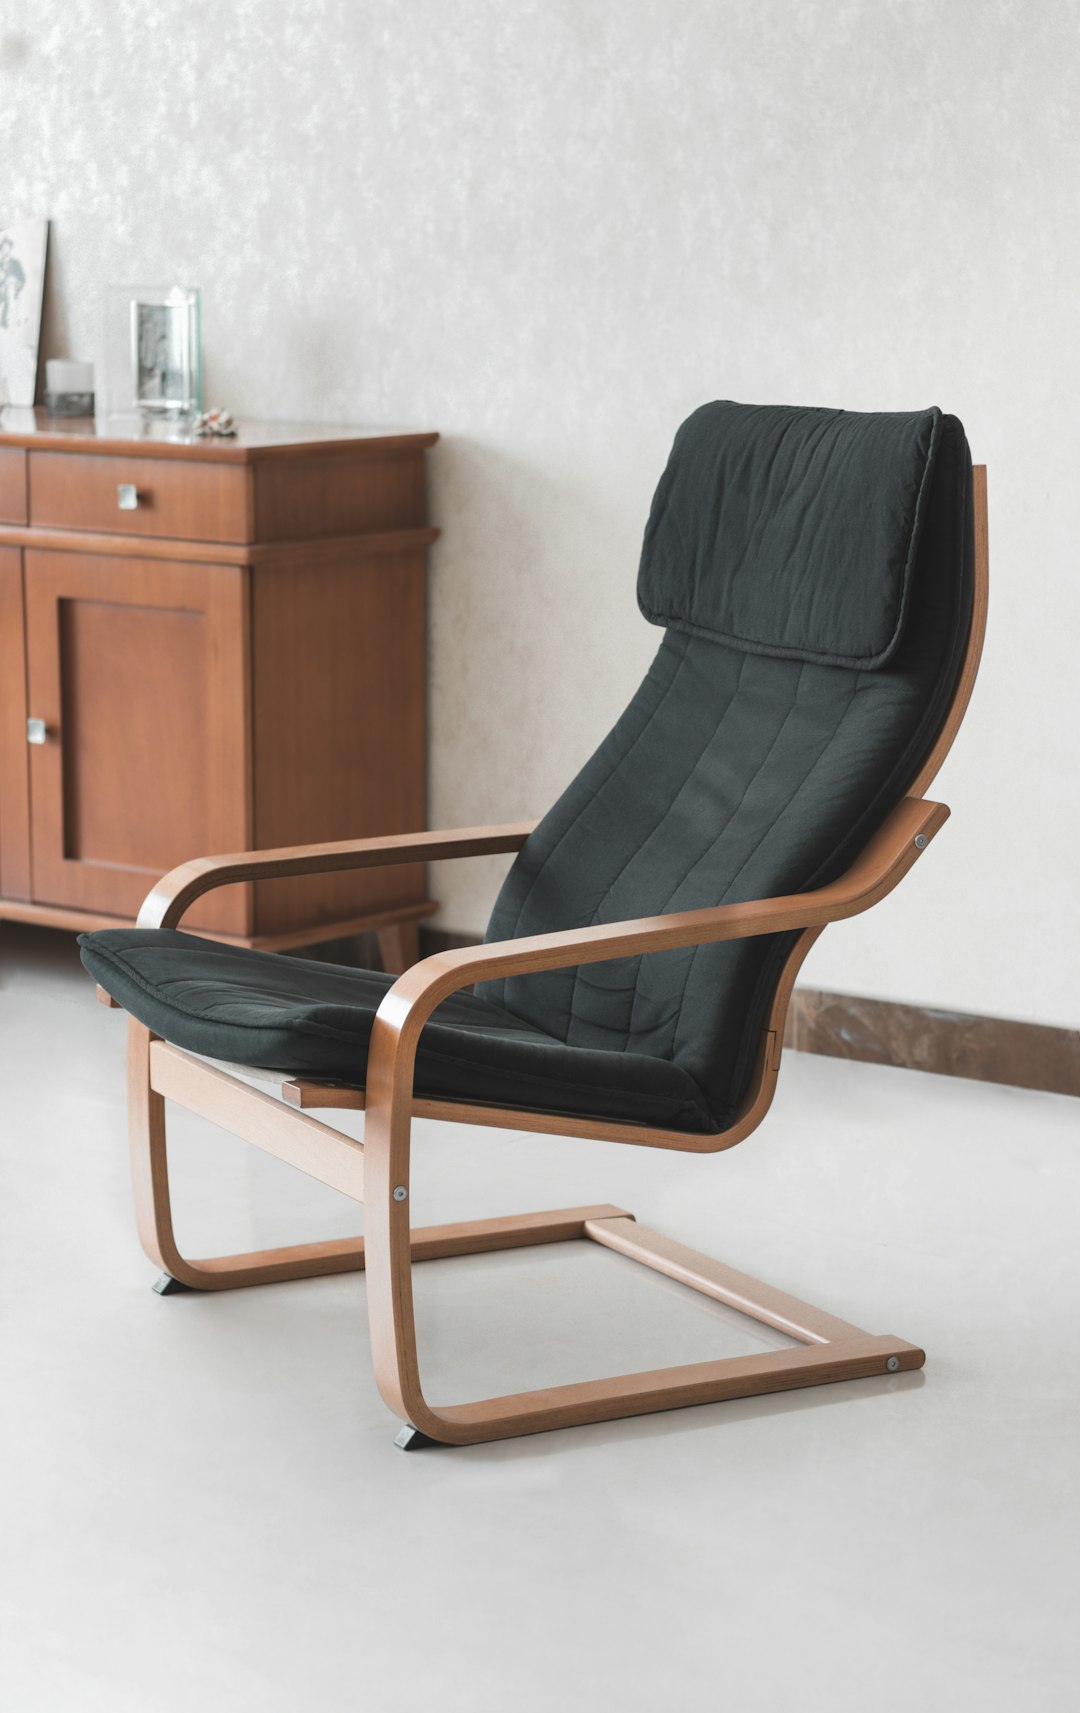  black padded brown wooden armchair chair